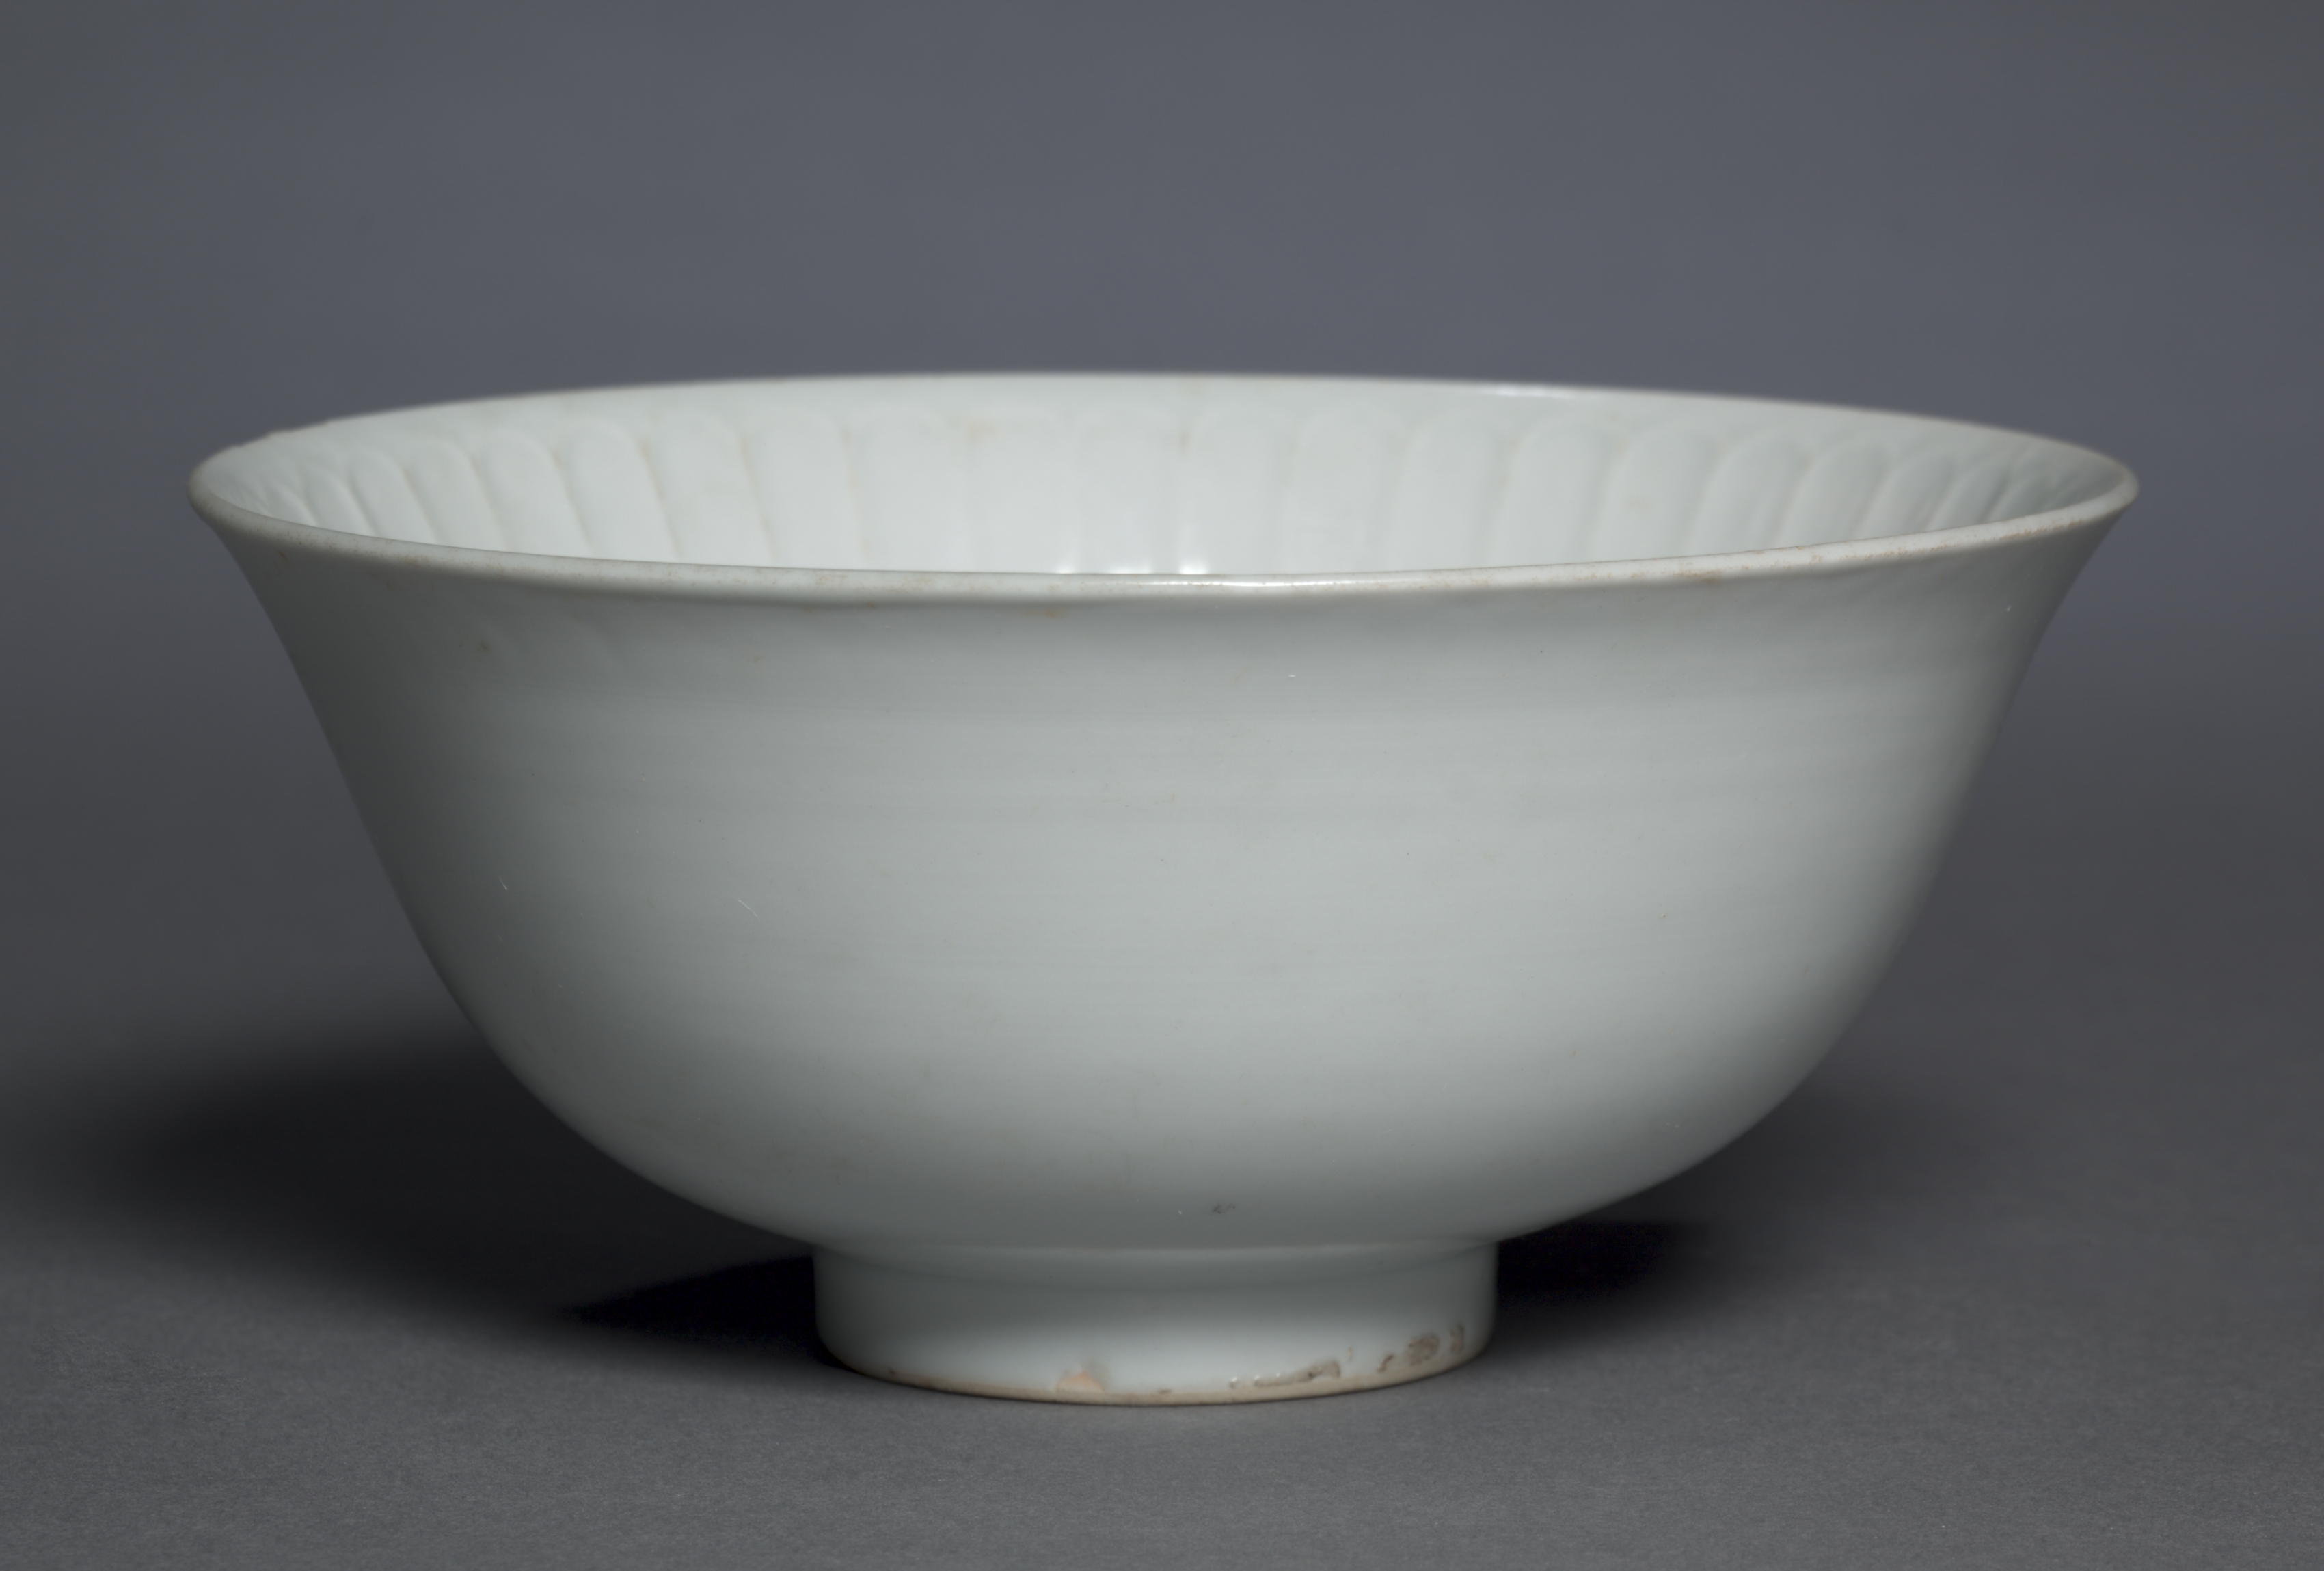 Bowl with Flower Petals